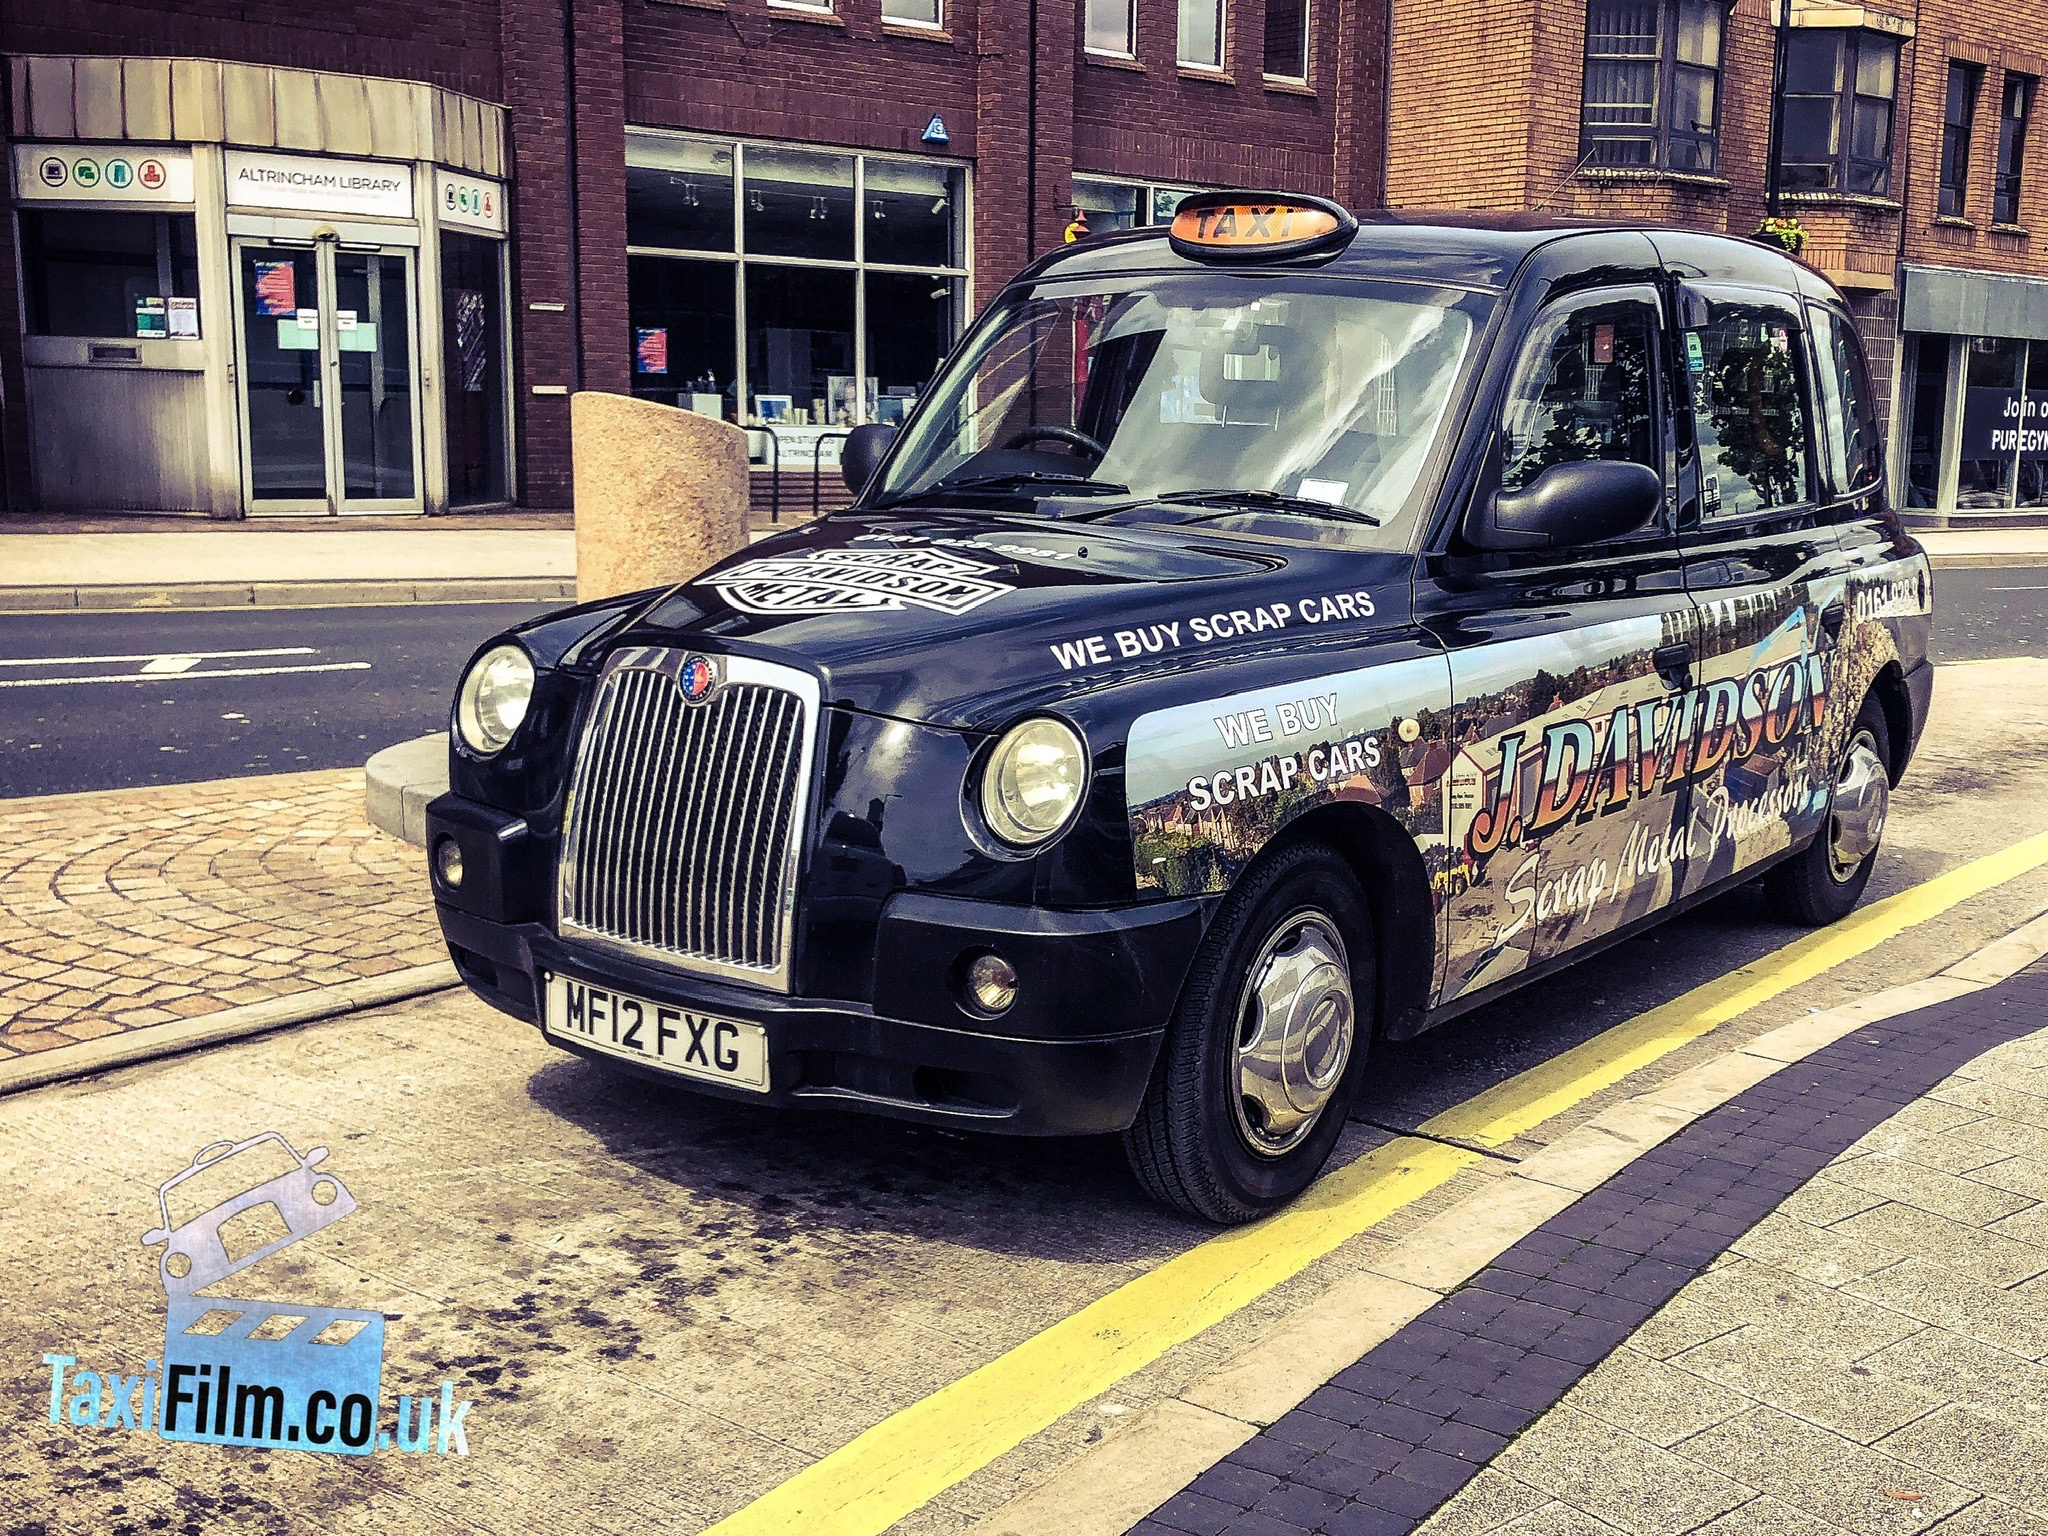 Black Tx4 Ads Taxi, 2012, Manchester
ref M0006